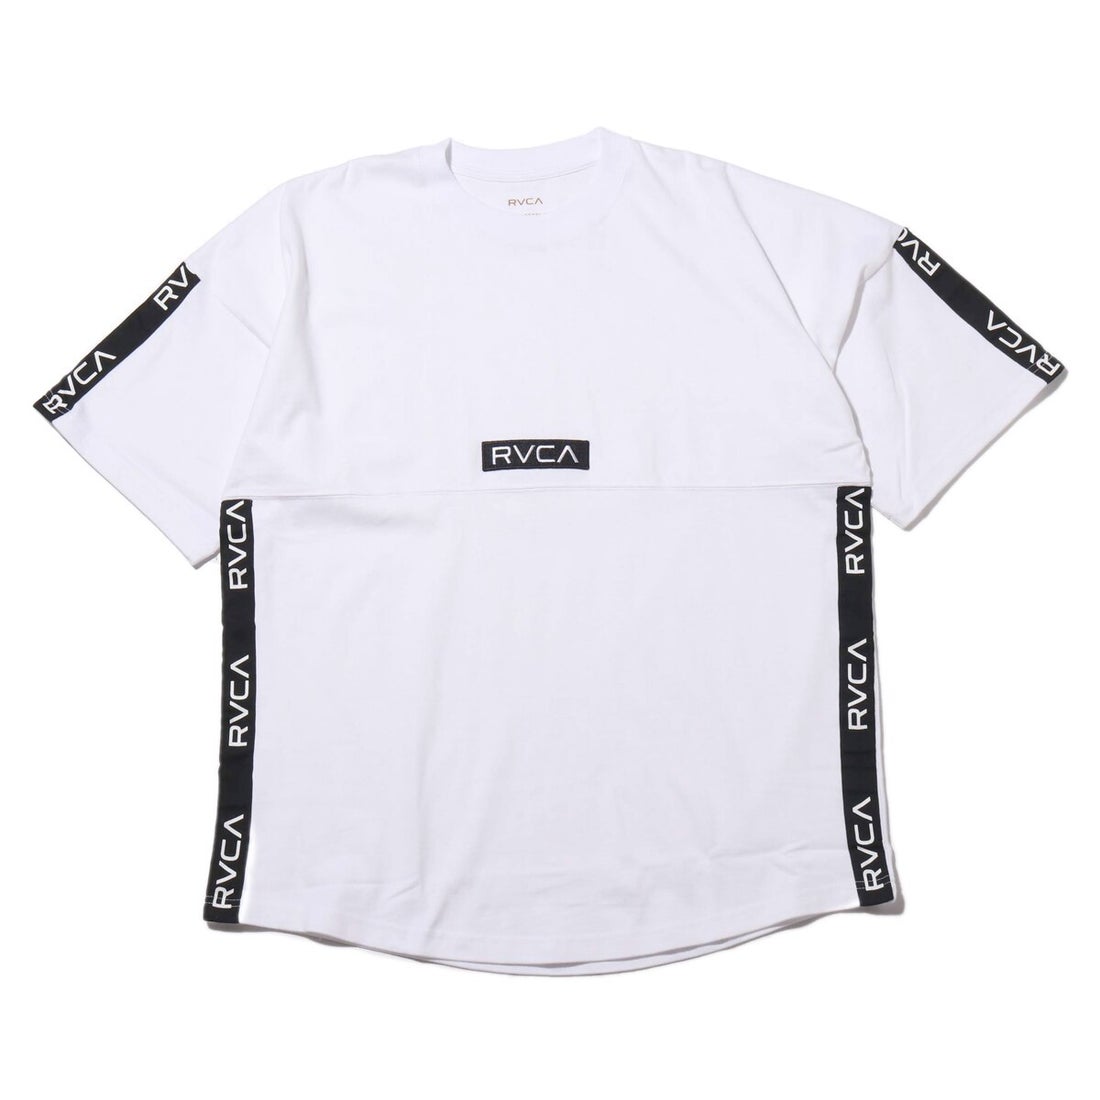 ARCH RVCA S/S TEE S ピンク ルーカ ロゴTシャツ